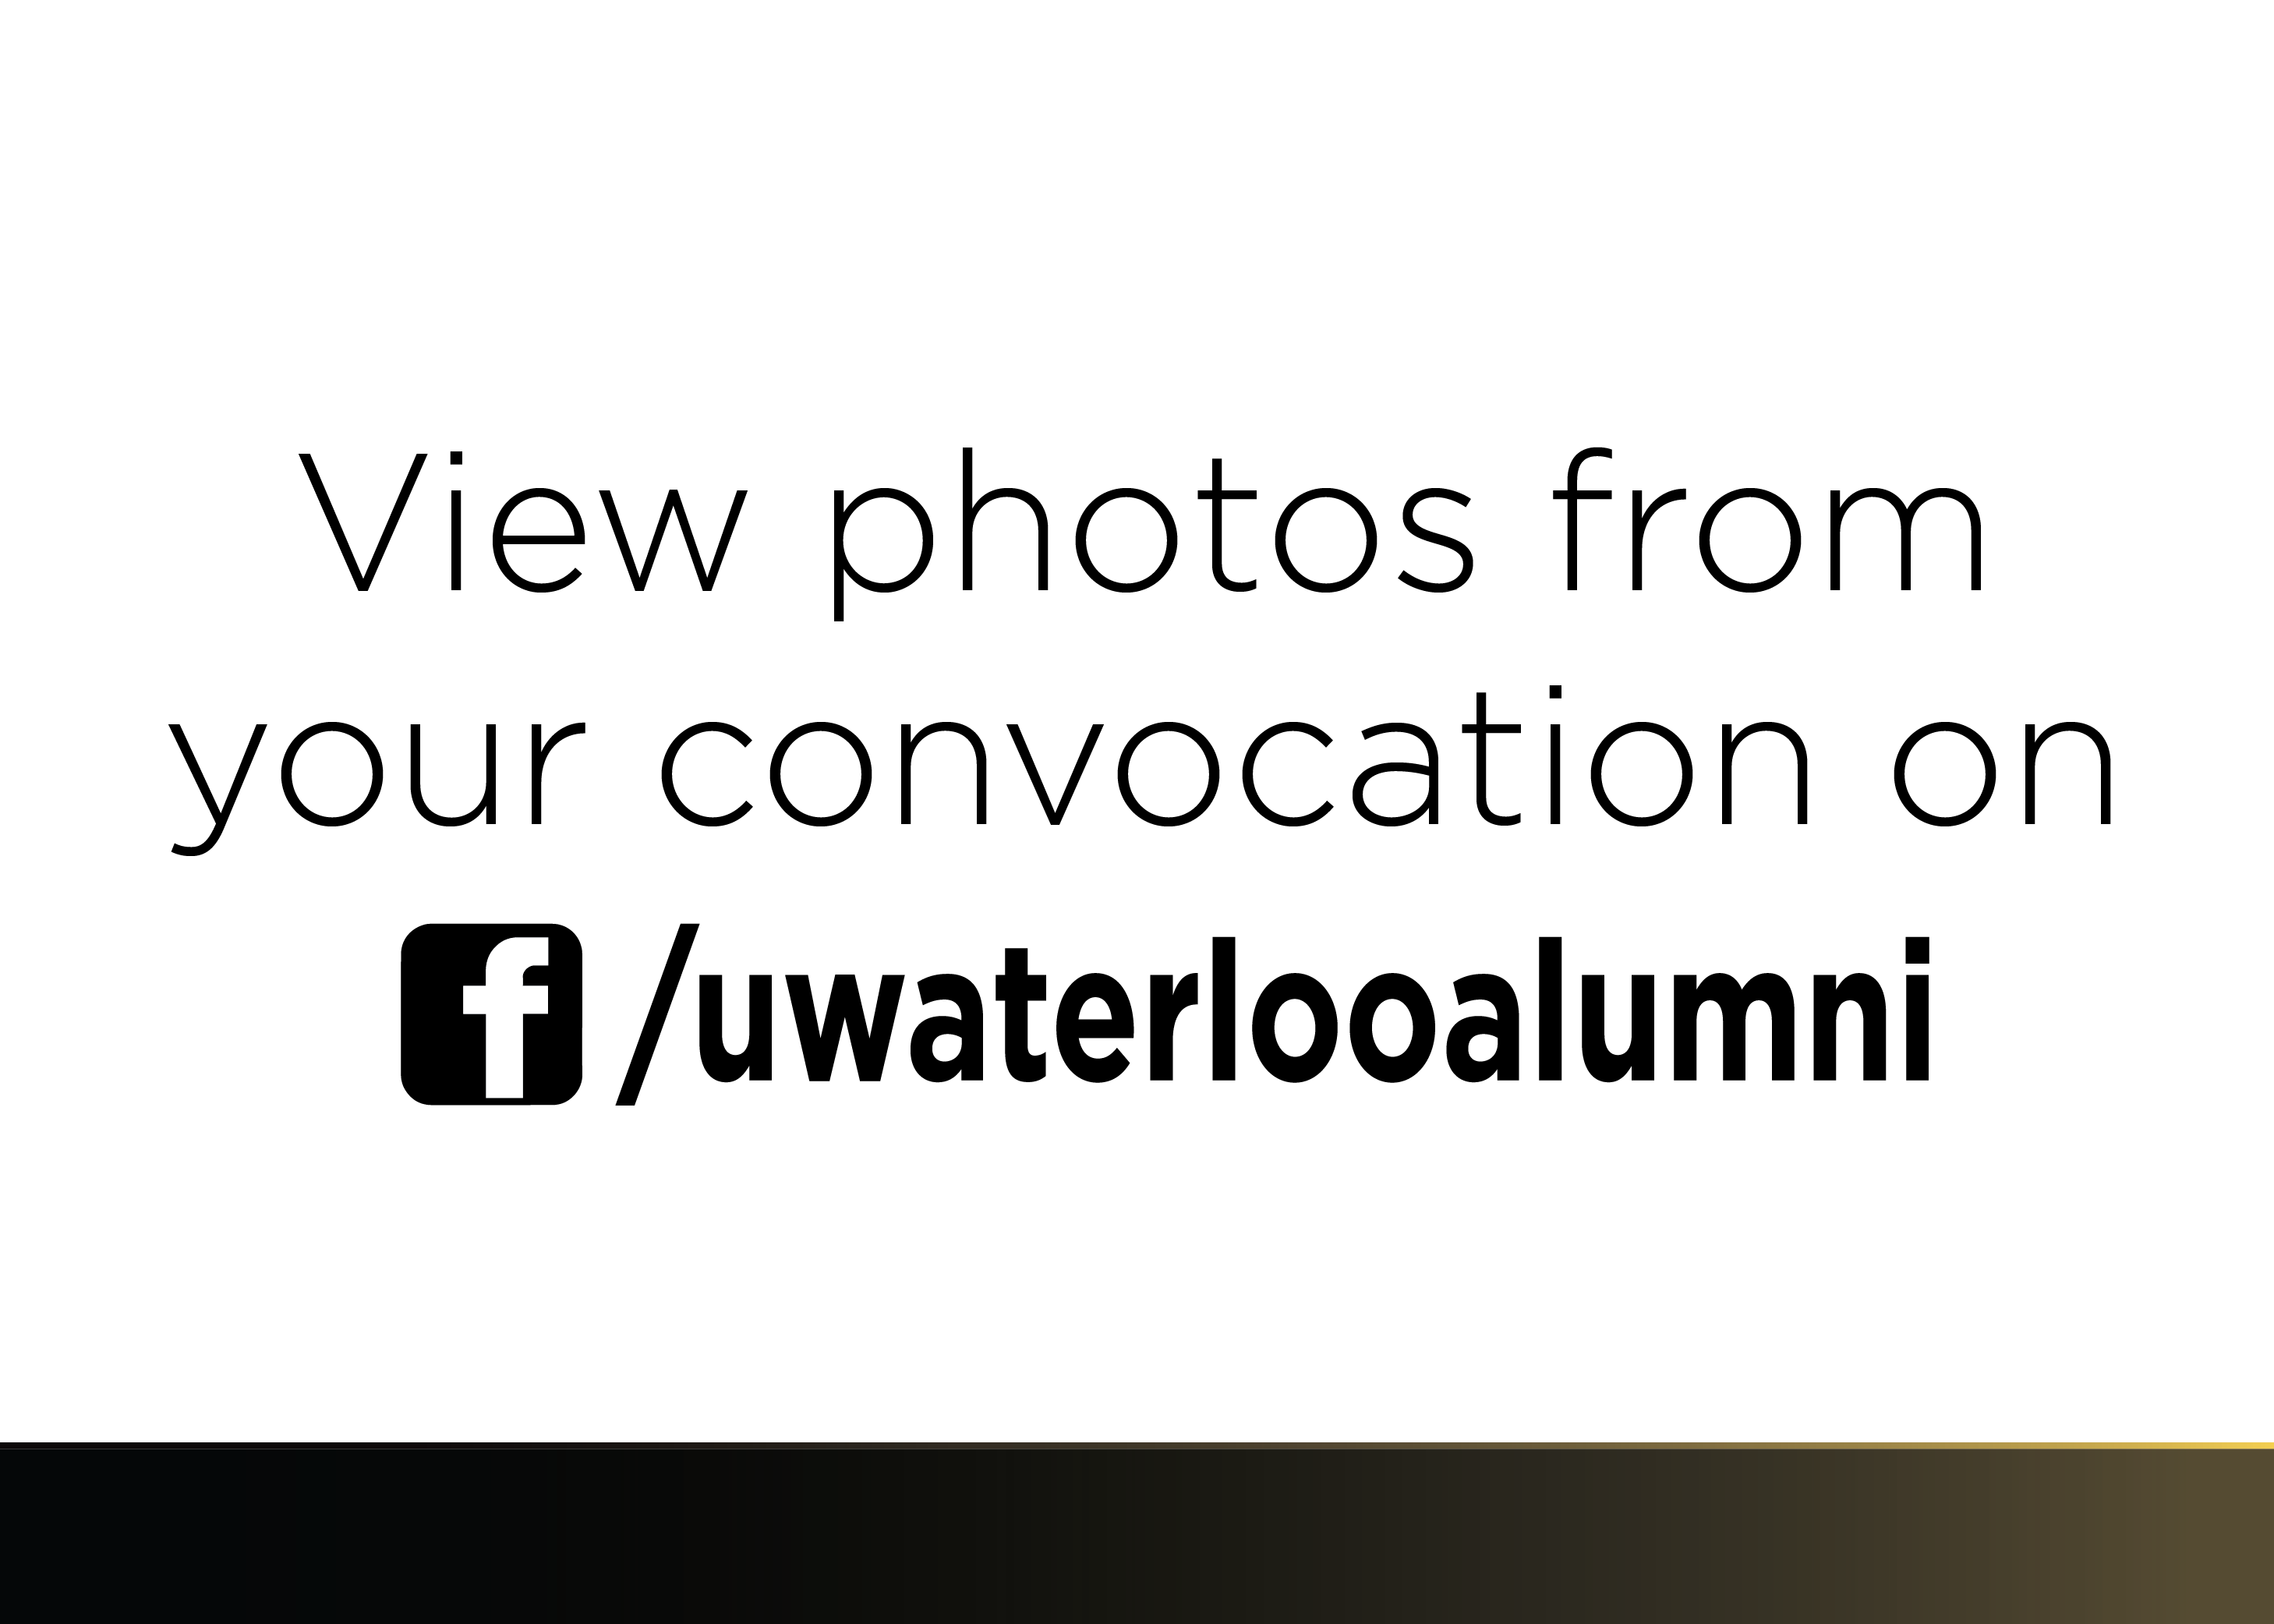 View photos from your convocation on Facebook.com/uwaterlooalumni